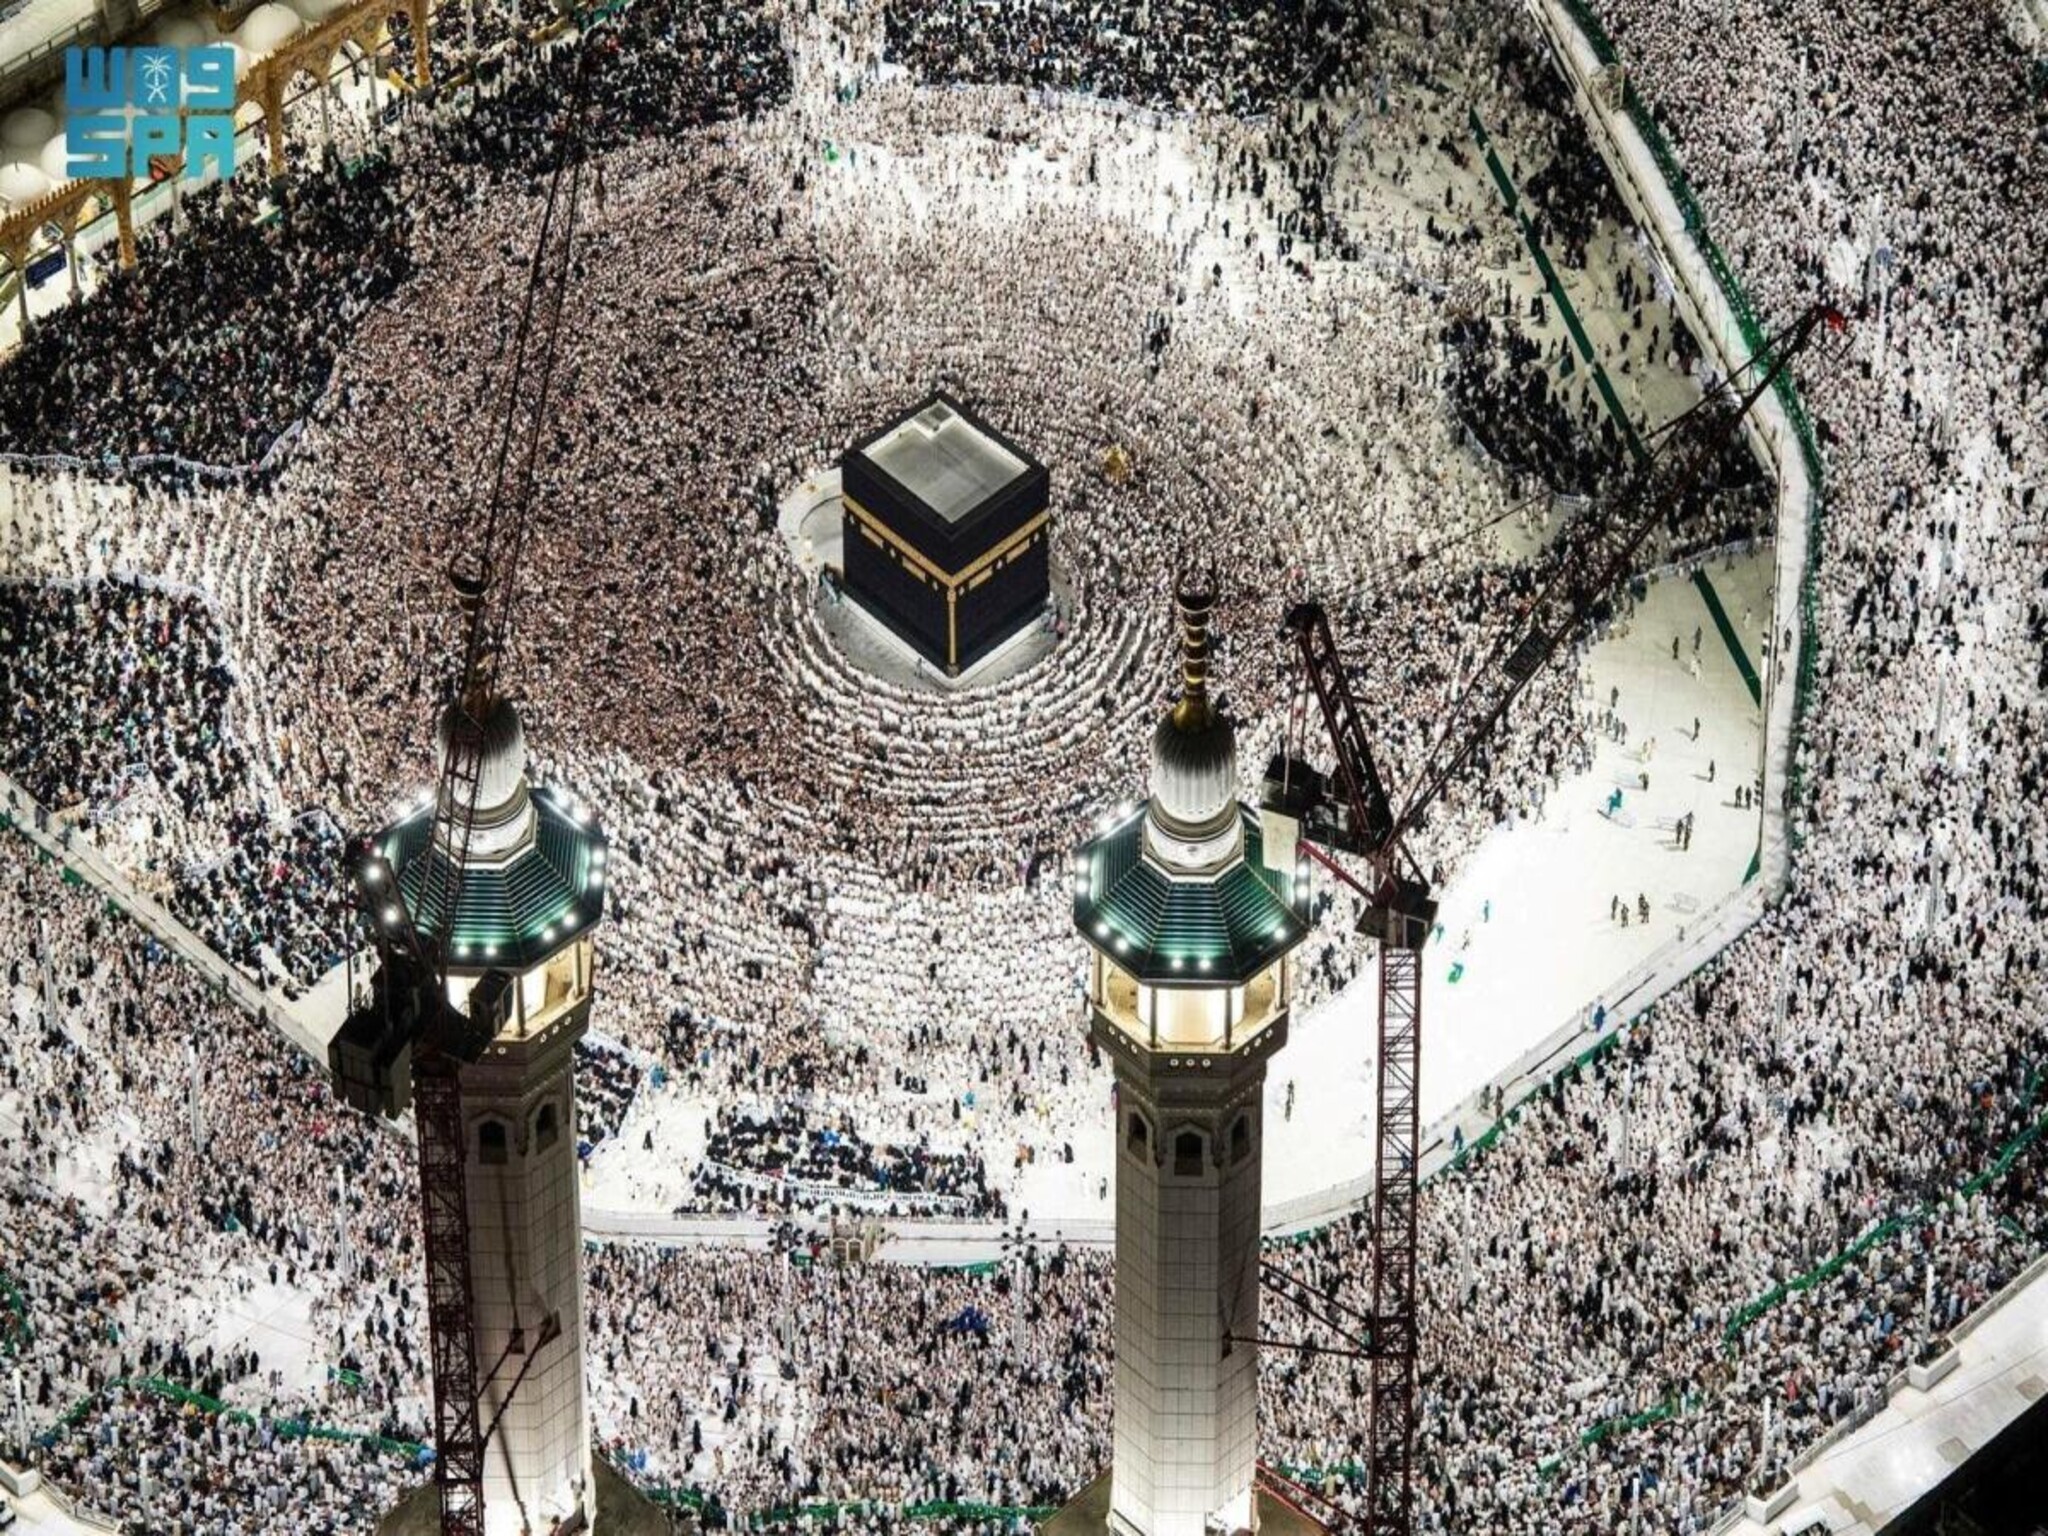 A Man tried to kill himself jumping from highest floors of Makkah Grand Mosque